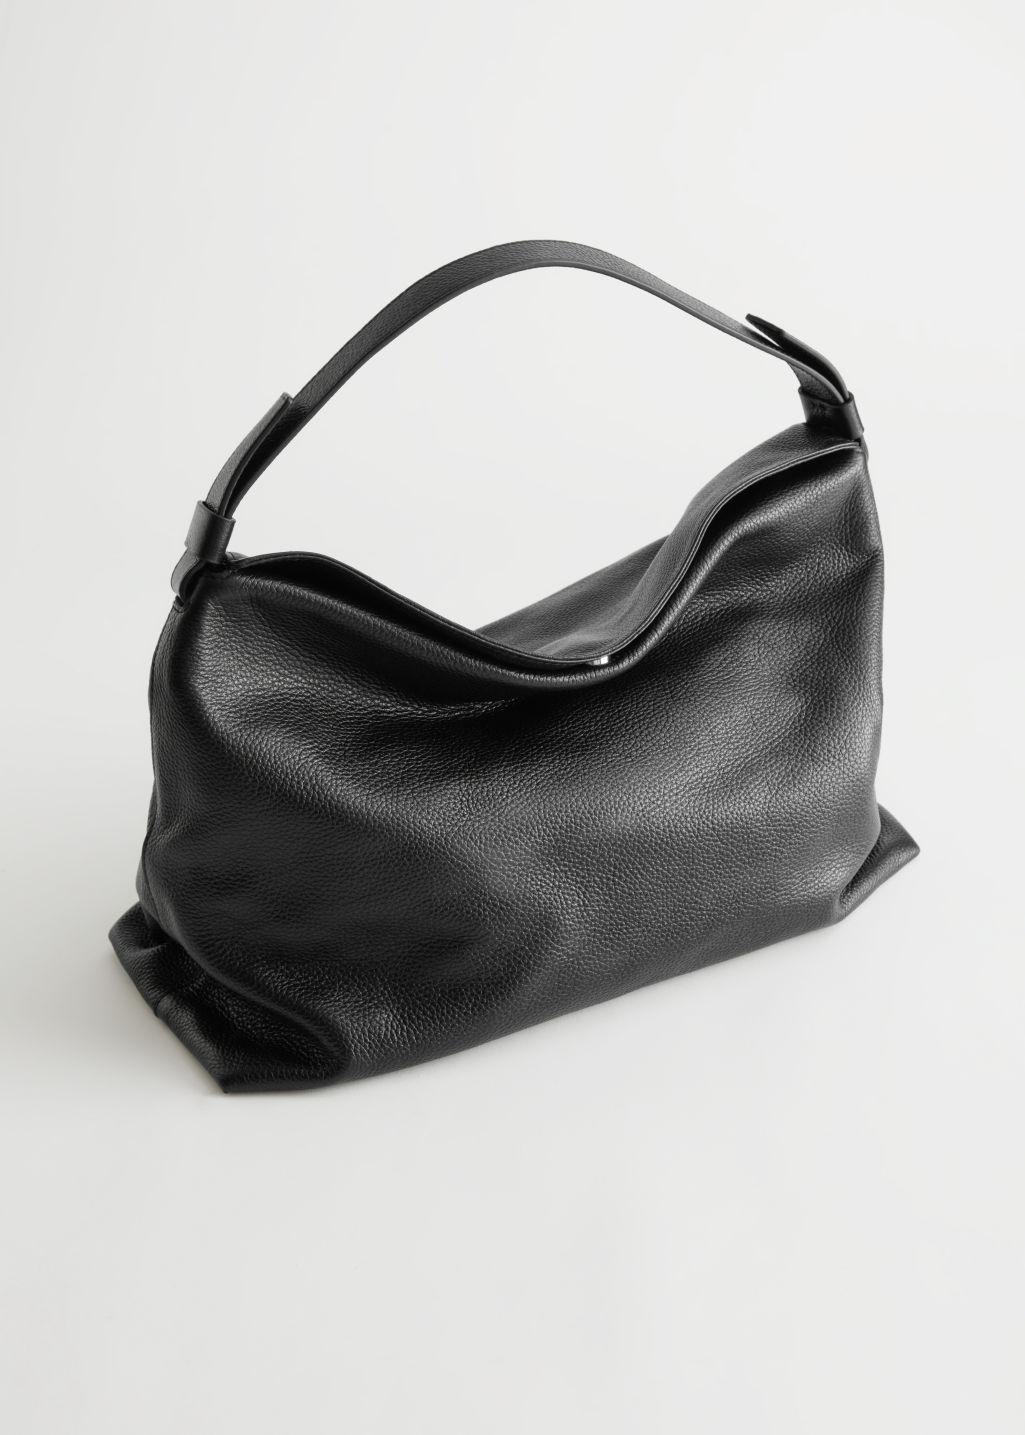 Black Leather Hobo Bag - Slouchy Leather Purse For Women